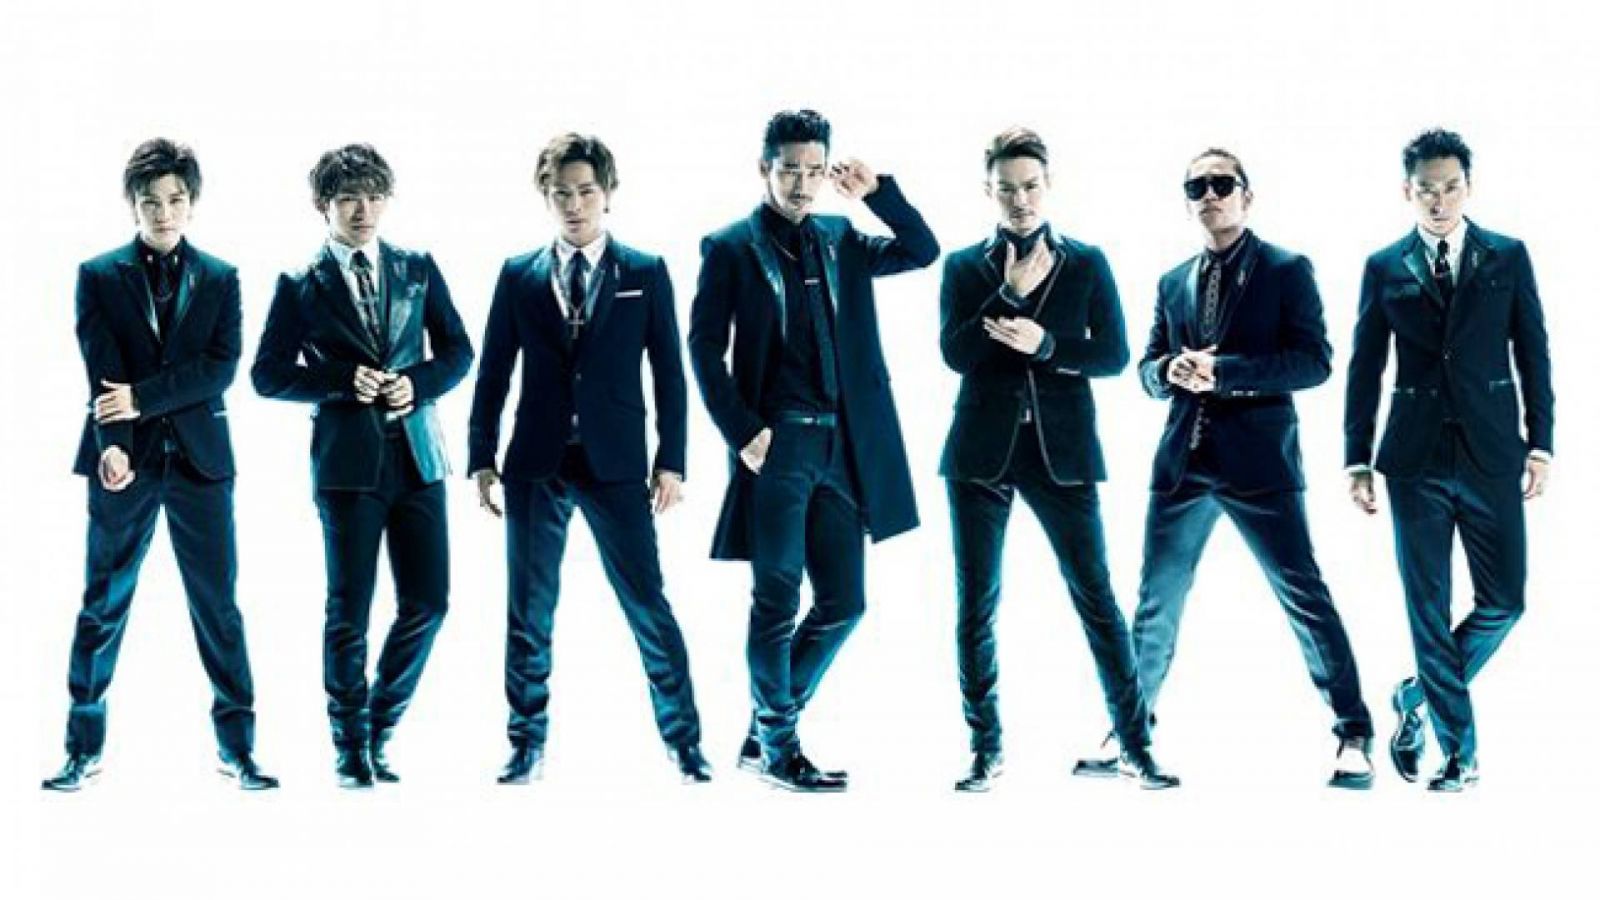 Sandaime J Soul Brothers from EXILE TRIBE to Release a New Album © 2015 LDH inc., provided by PR TIMES Inc.